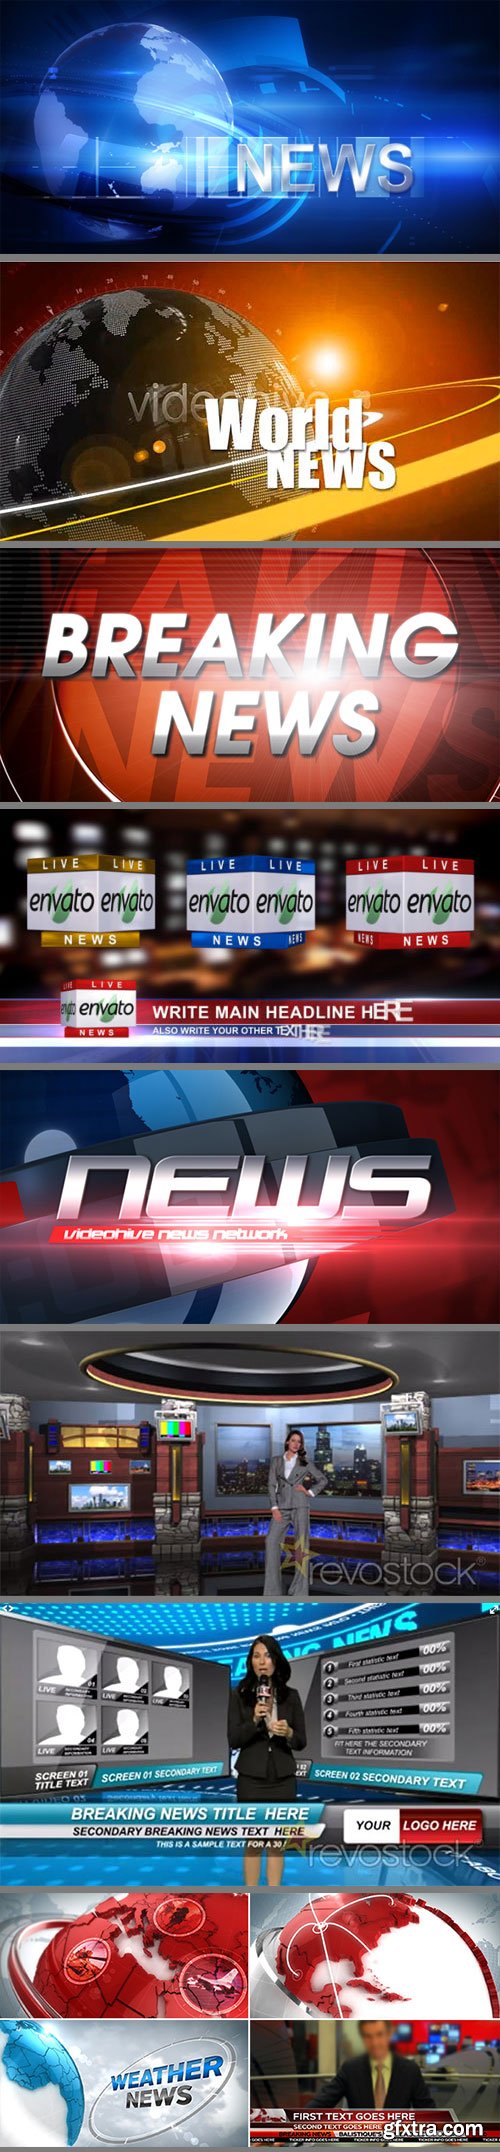 News Broadcast Projects Pack - VideoHive & RevoStock